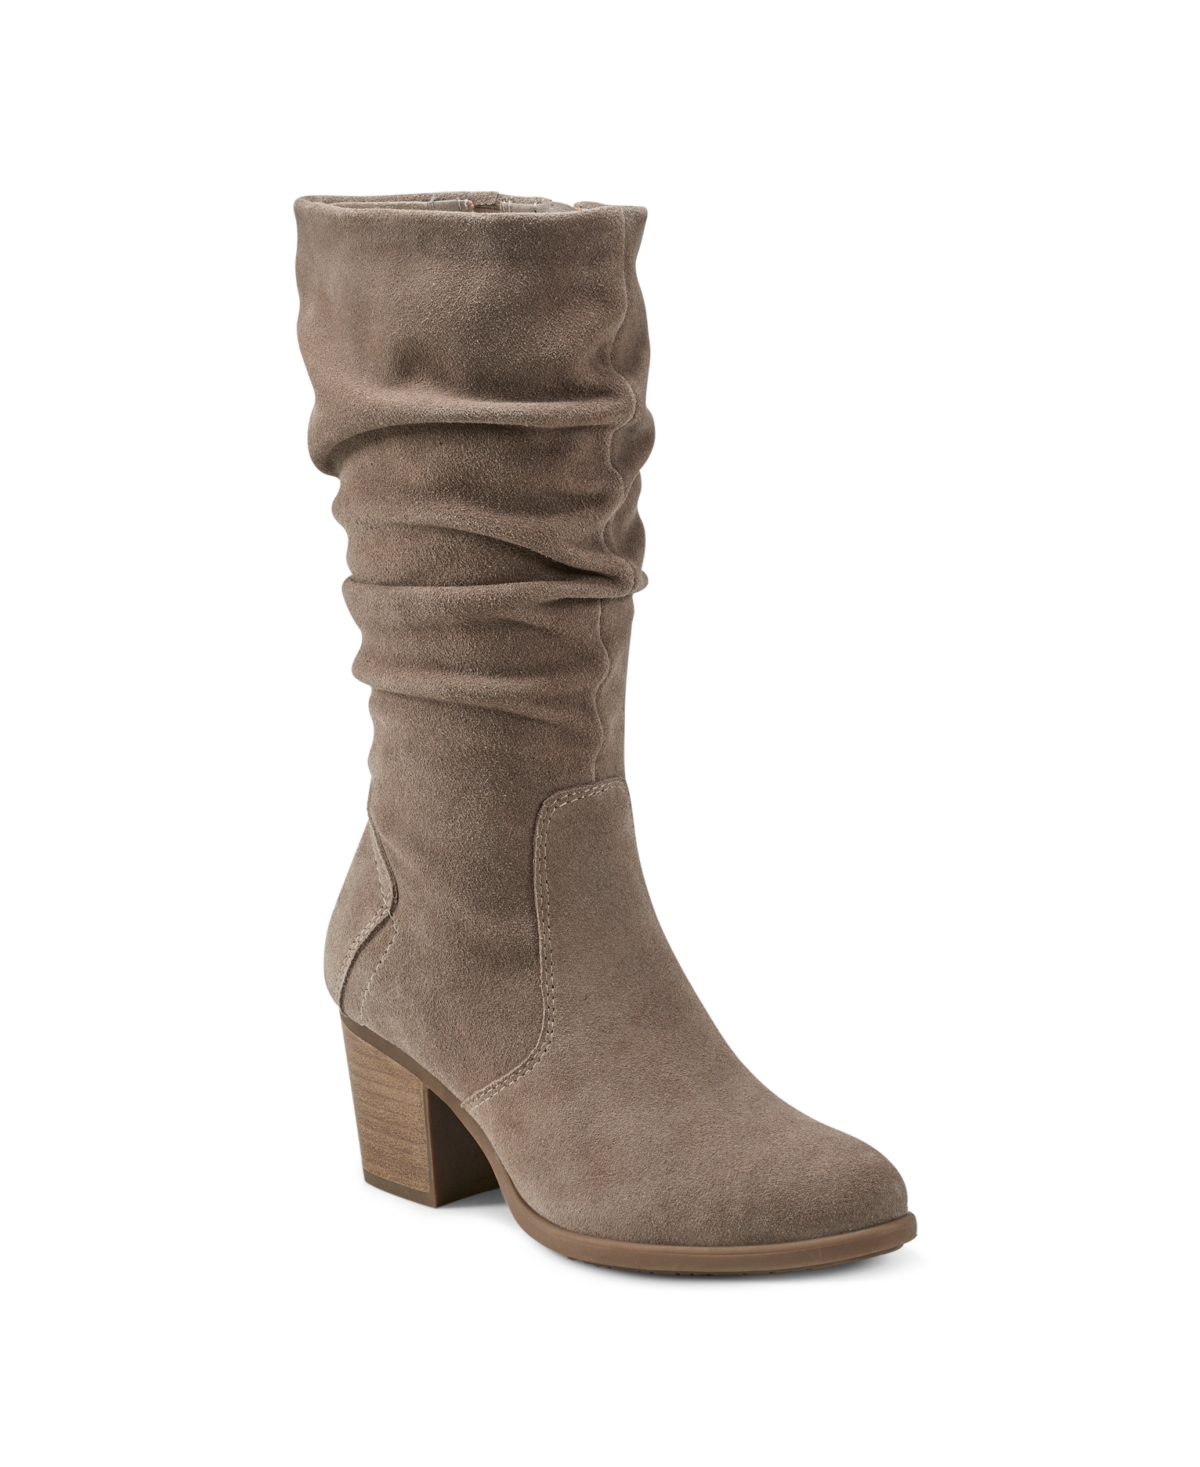 Earth Women's Vine Block Heel Almond Toe Narrow Calf Casual Boots In Taupe Suede